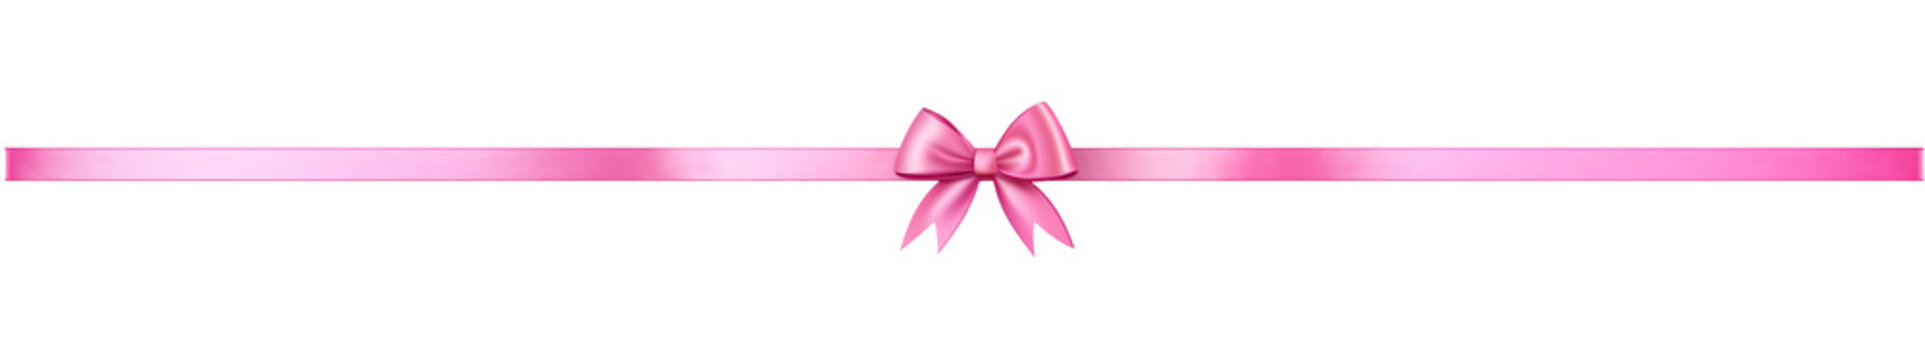 pink ribbon and bow isolated against transparent background